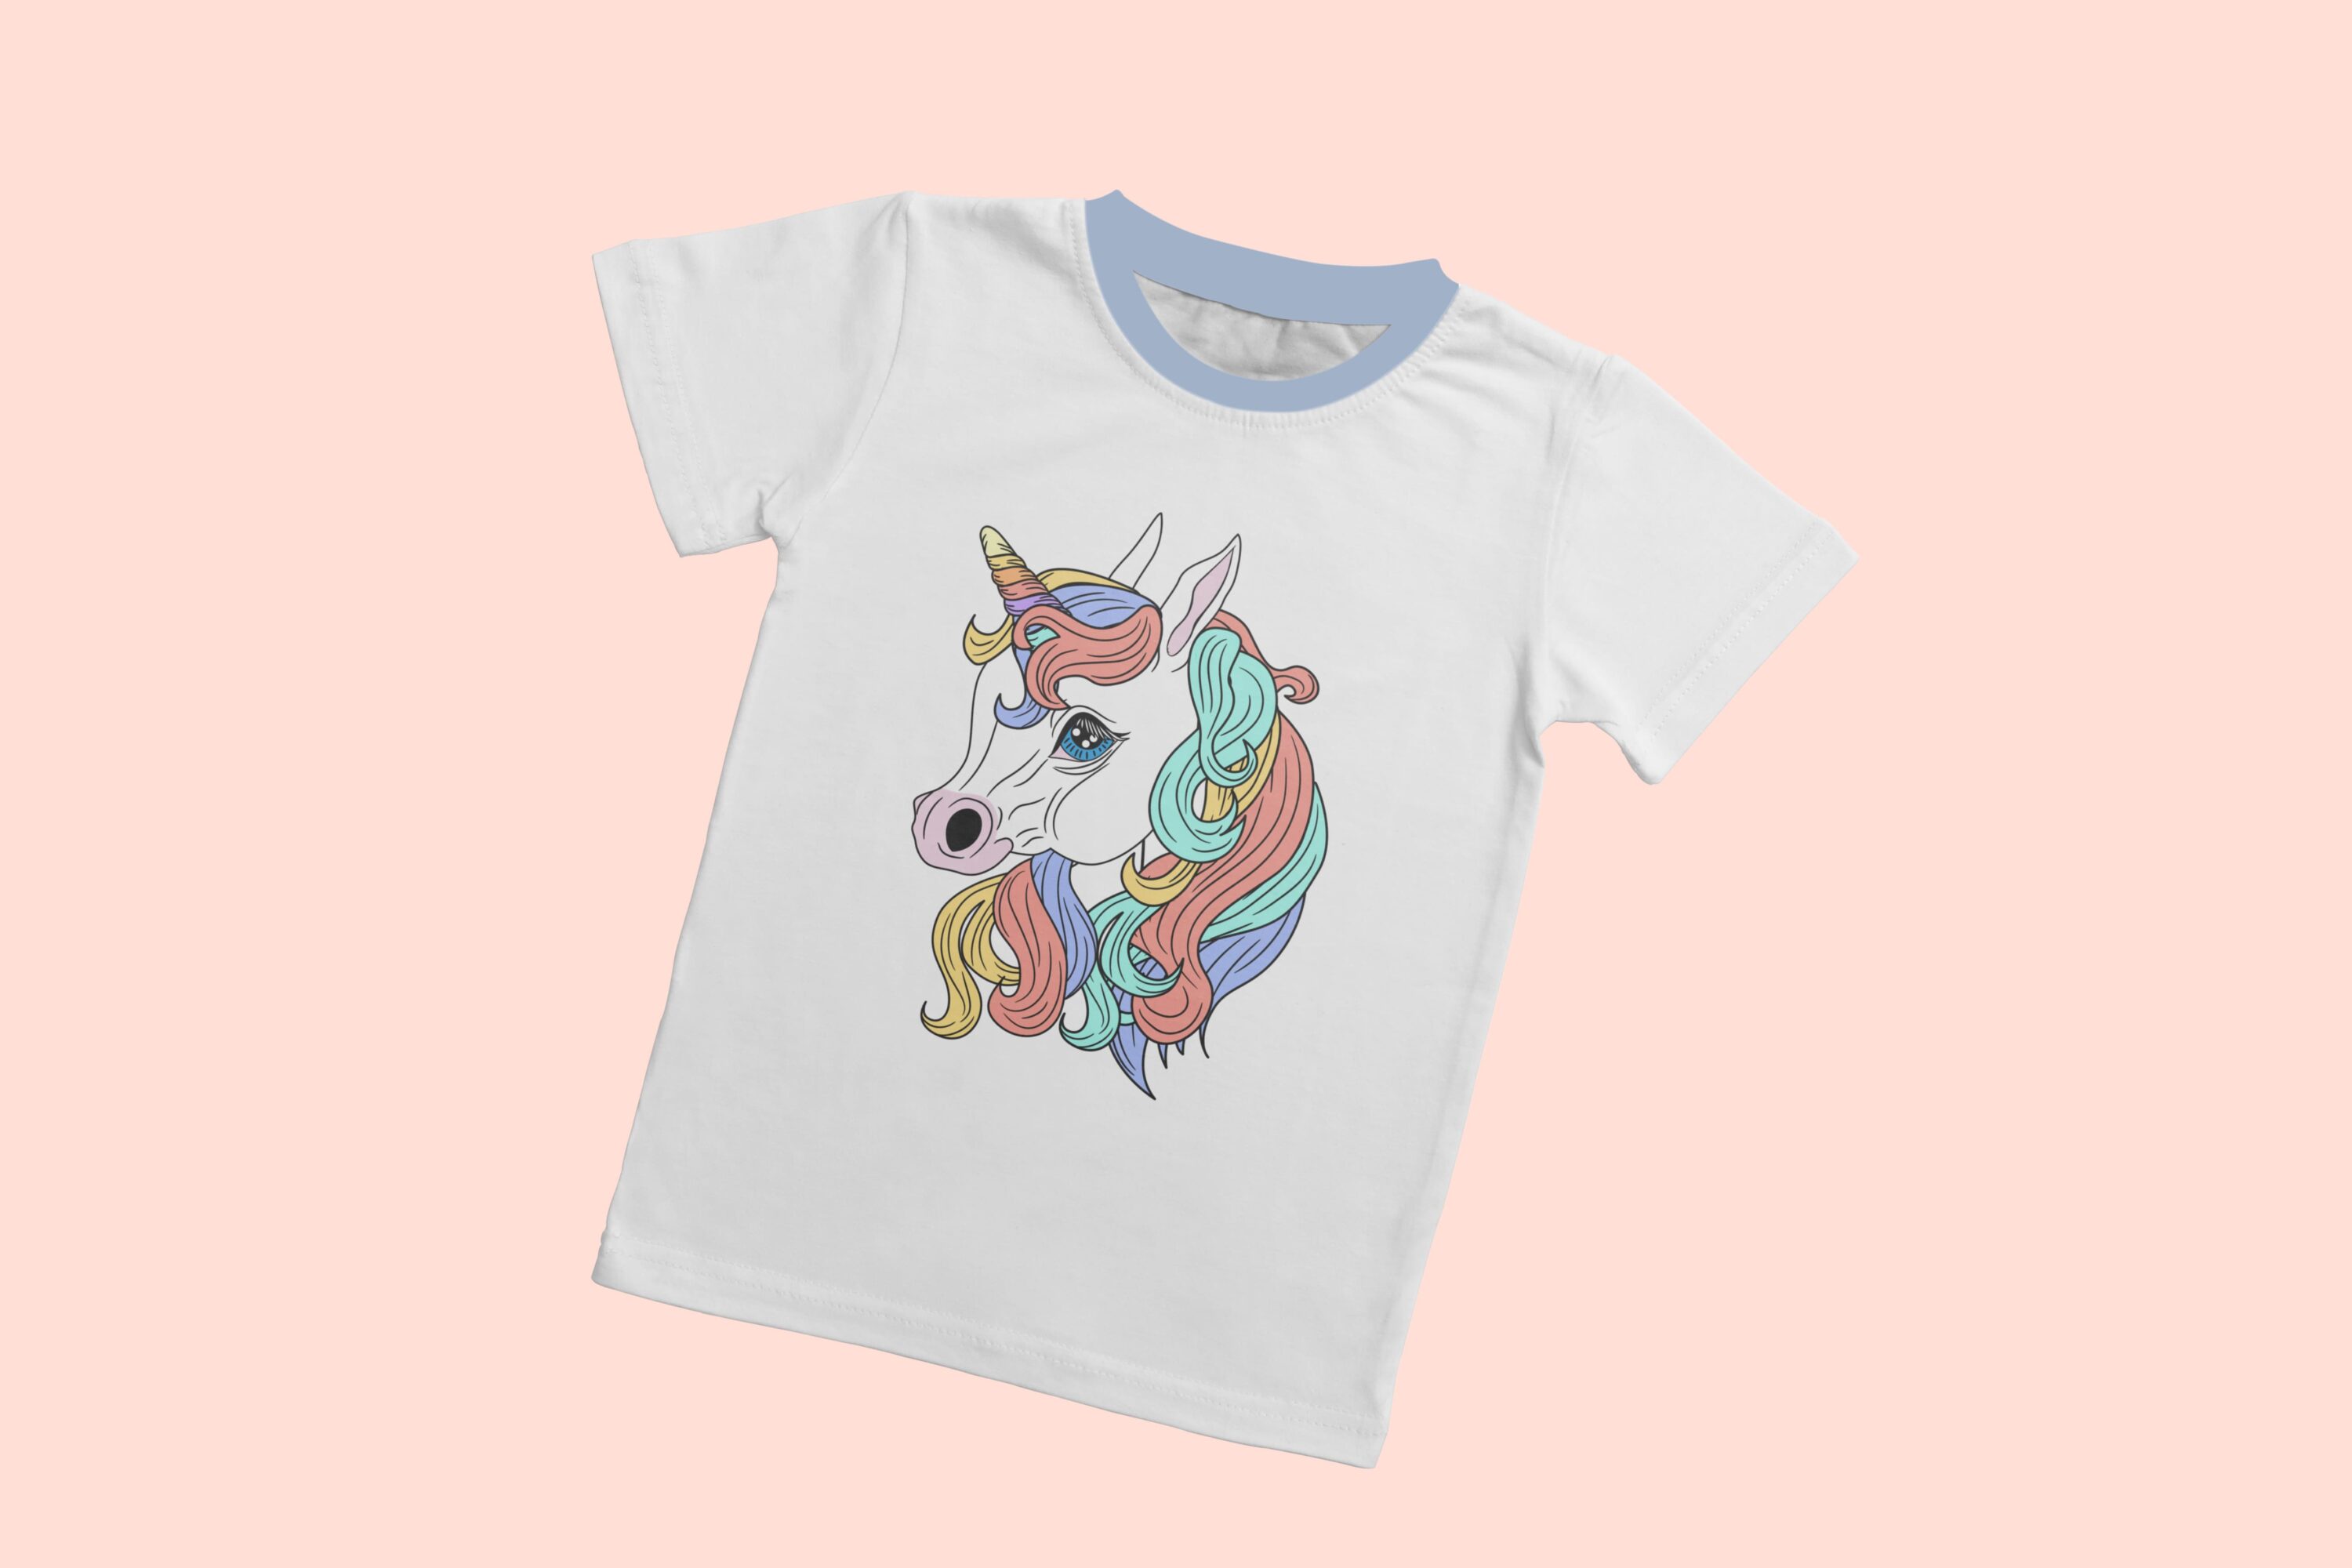 White t-shirt with a blue collar and a colorful unicorn face on a pink background.